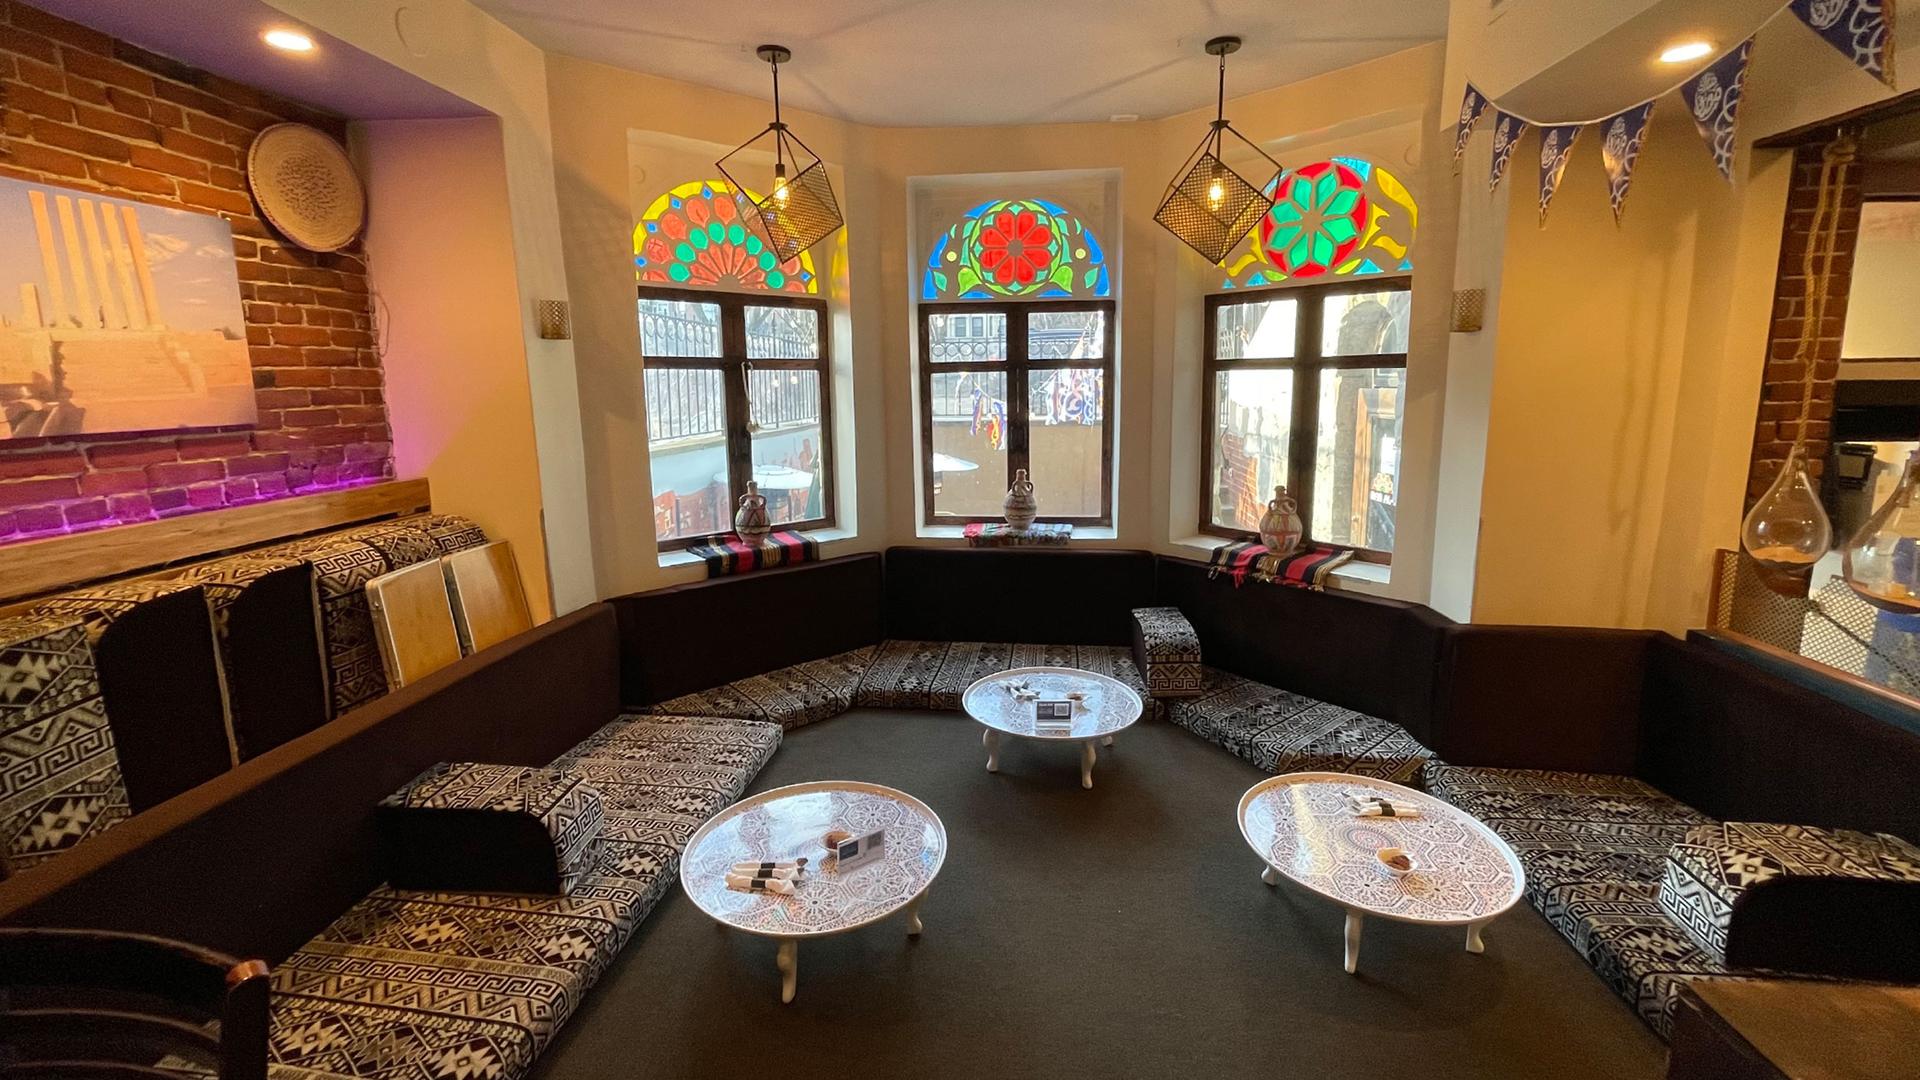 The ambiance of the Bab al-Yemen restaurant in Boston adds to a unique dining experience for customers, Apr. 12, 2023.